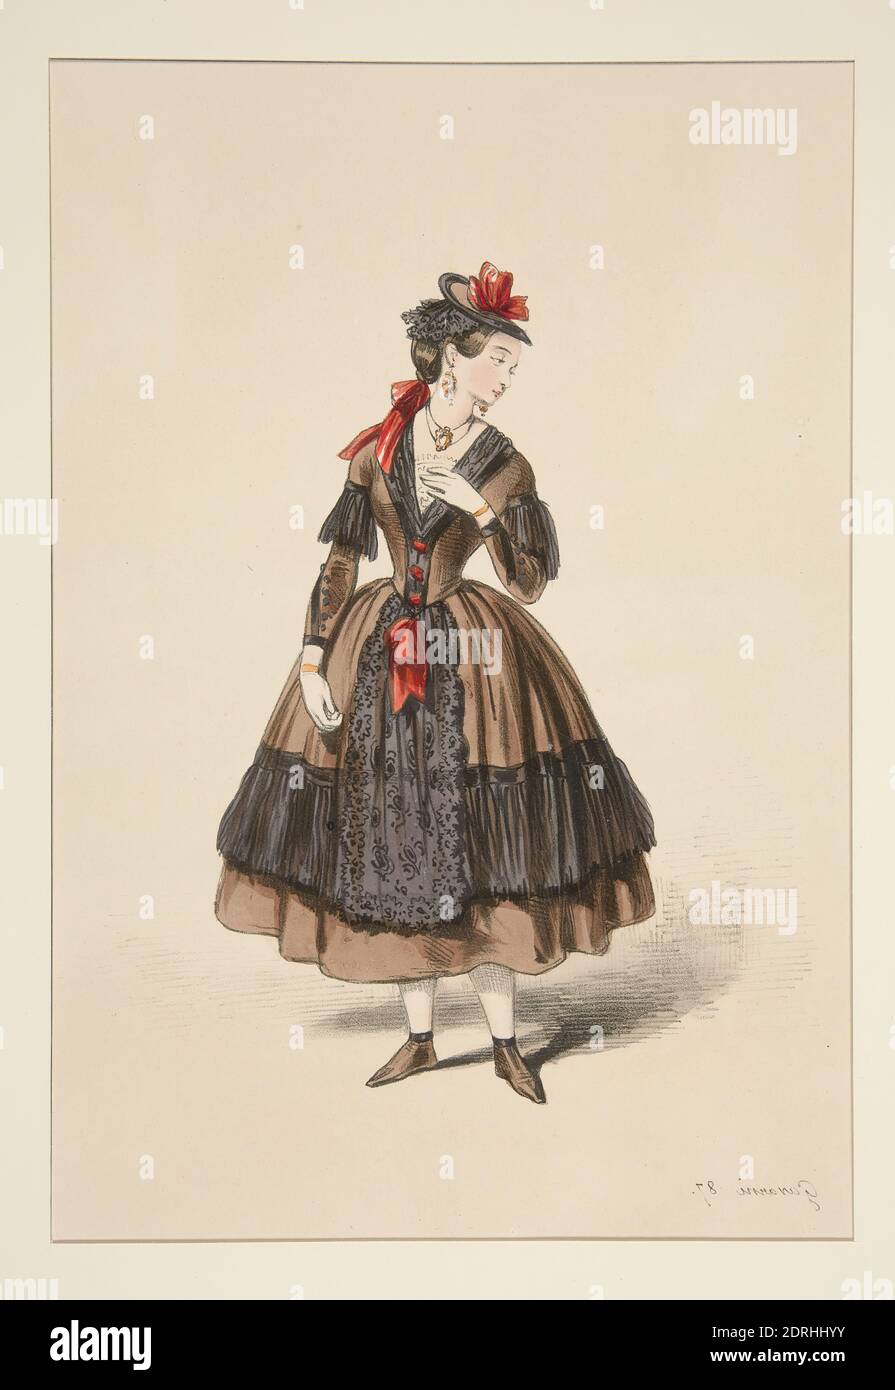 Artist: Paul Gavarni, French, 1804–1866, PORTUGAISE. Corsage et jupe de soie, Lithograph, colored, French, 19th century, Works on Paper - Prints Stock Photo